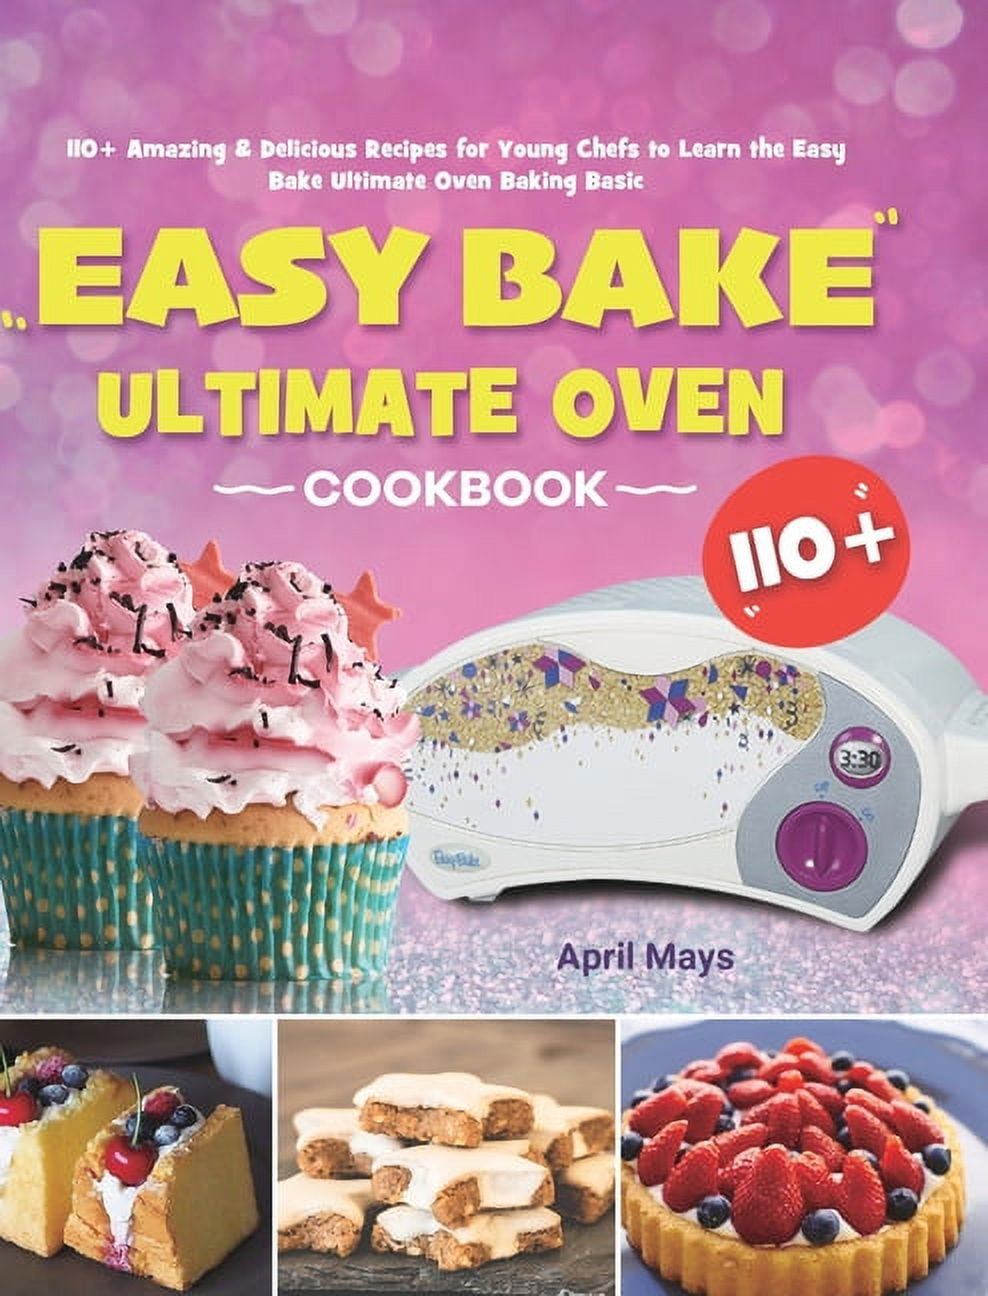 Kitchen Chick - OMG - it's the world's smallest baking set :-) Measure dry  ingredients in wee-spoons! Bake itty-bitty pies, cupcakes, pastries &  pizzas! This set includes a 48 page book filled